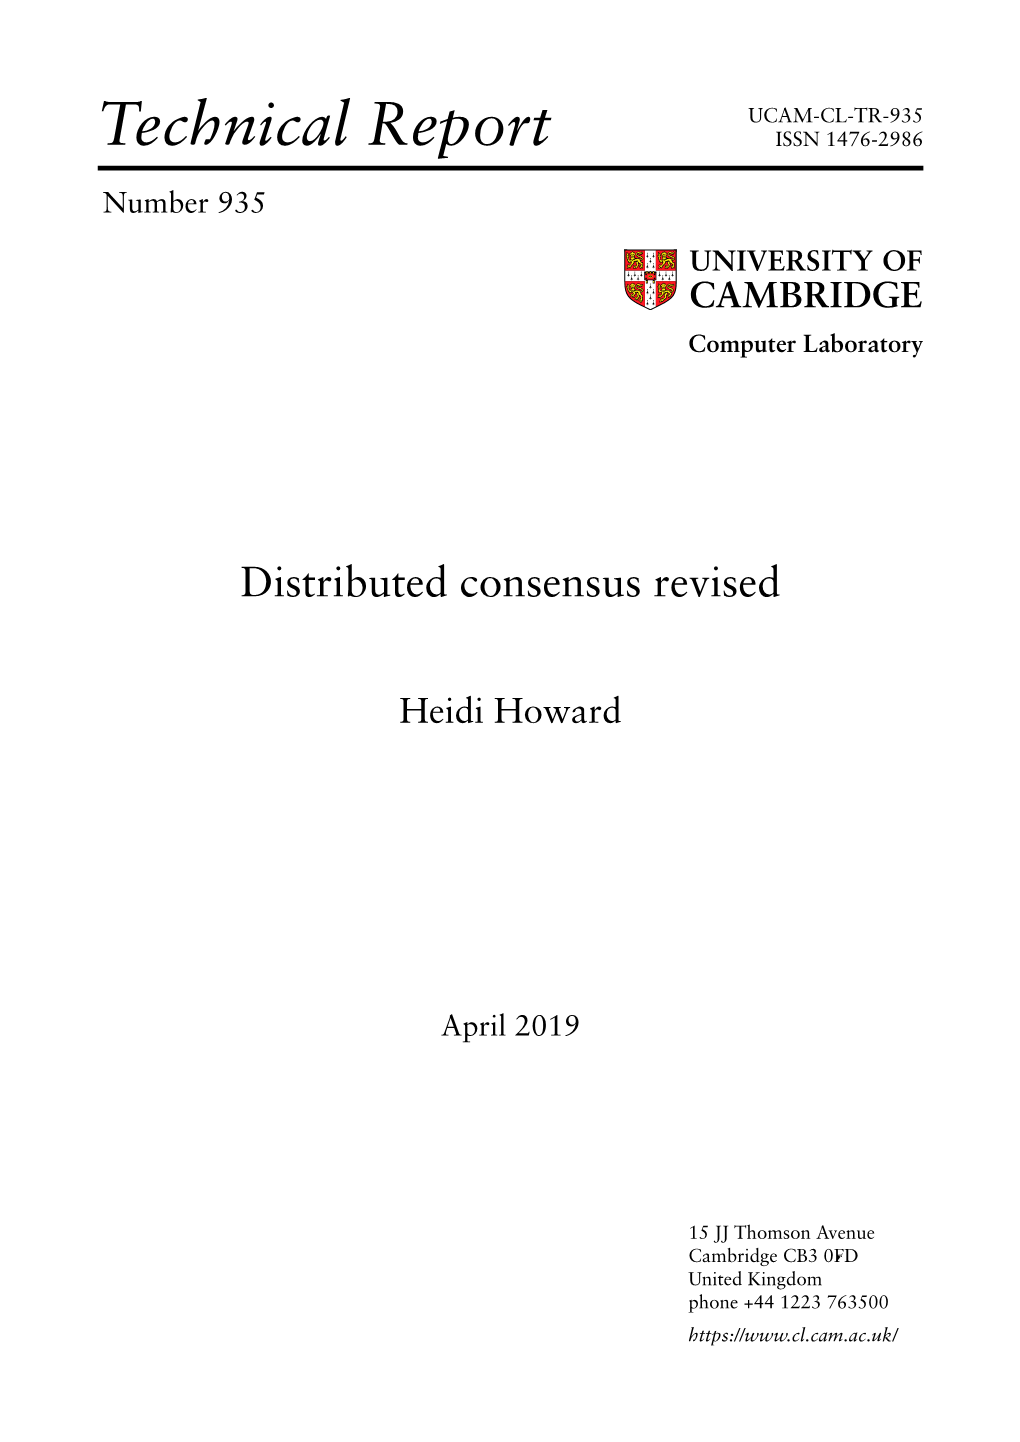 Distributed Consensus Revised